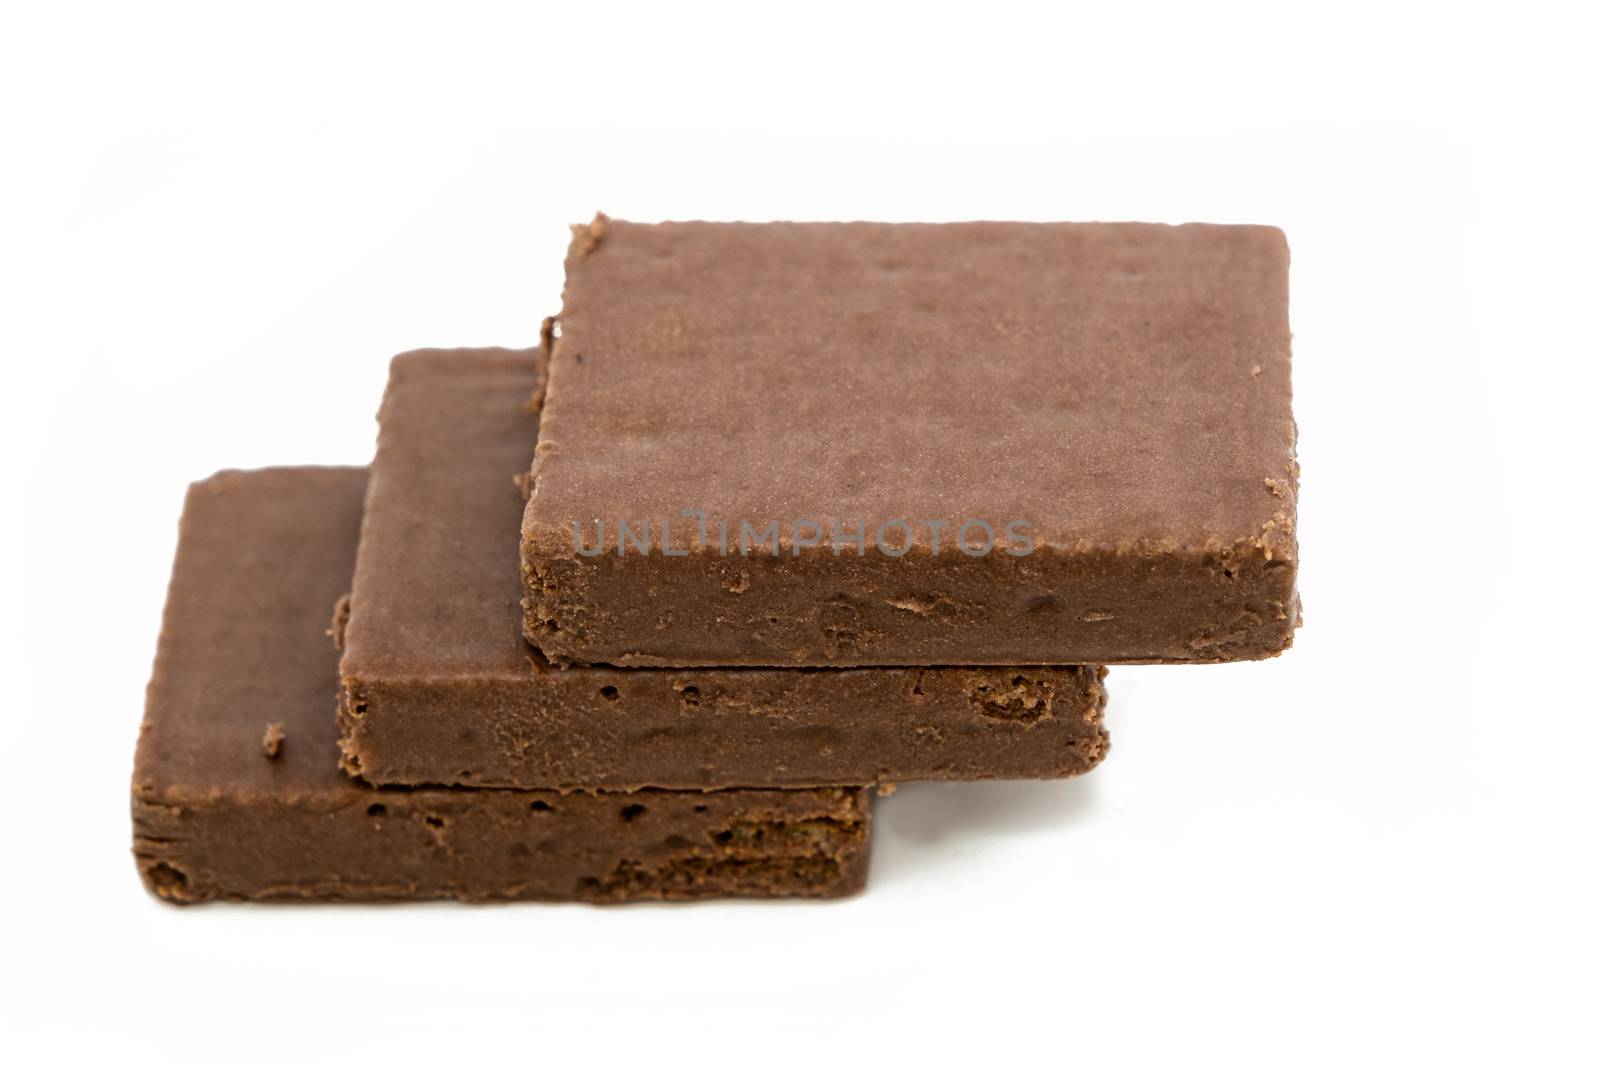 The Pieces of dark chocolate isolated on white background.